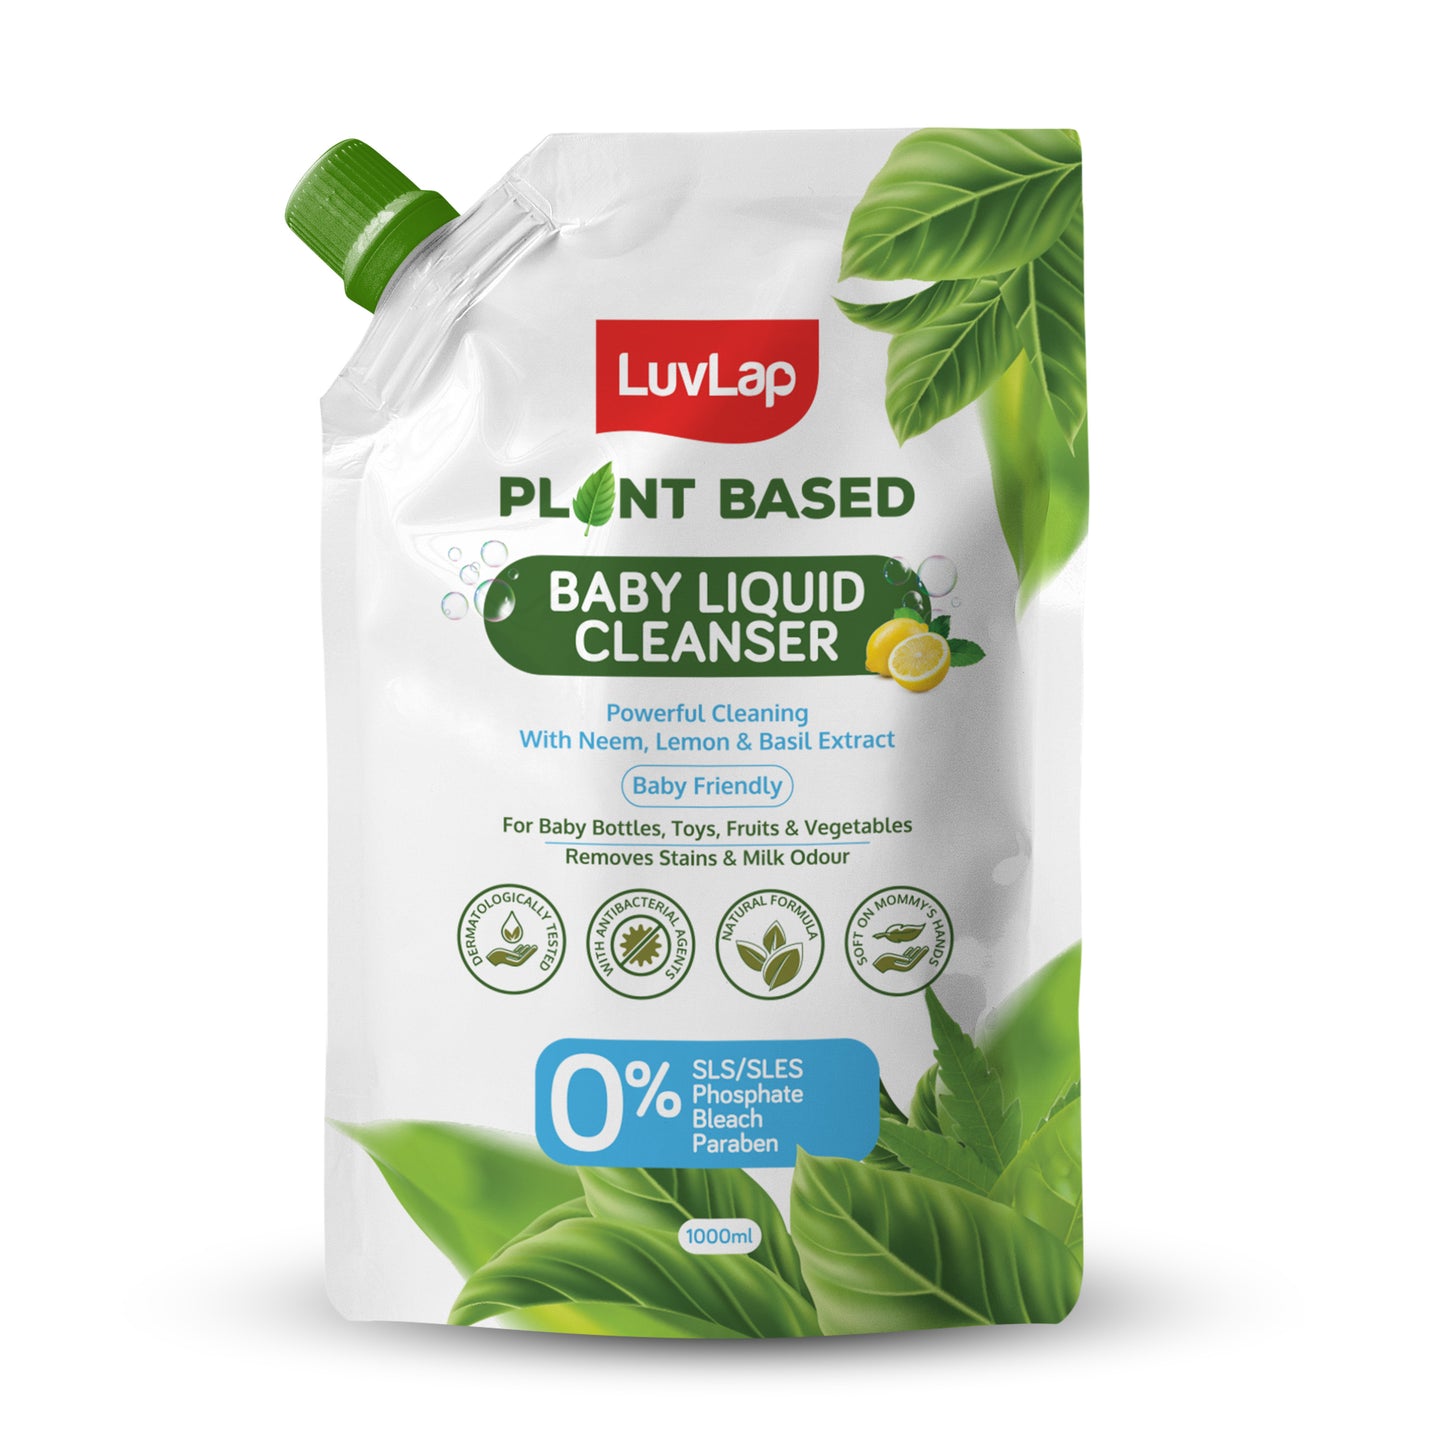 Plant Based Liquid Cleanser, Refill pack- 1000ml, With Neem, Lemon & Basil, For Feeding Accessories, Toys, Fruits & Vegetables, 100% Food Grade, Free From Bleach & SLS